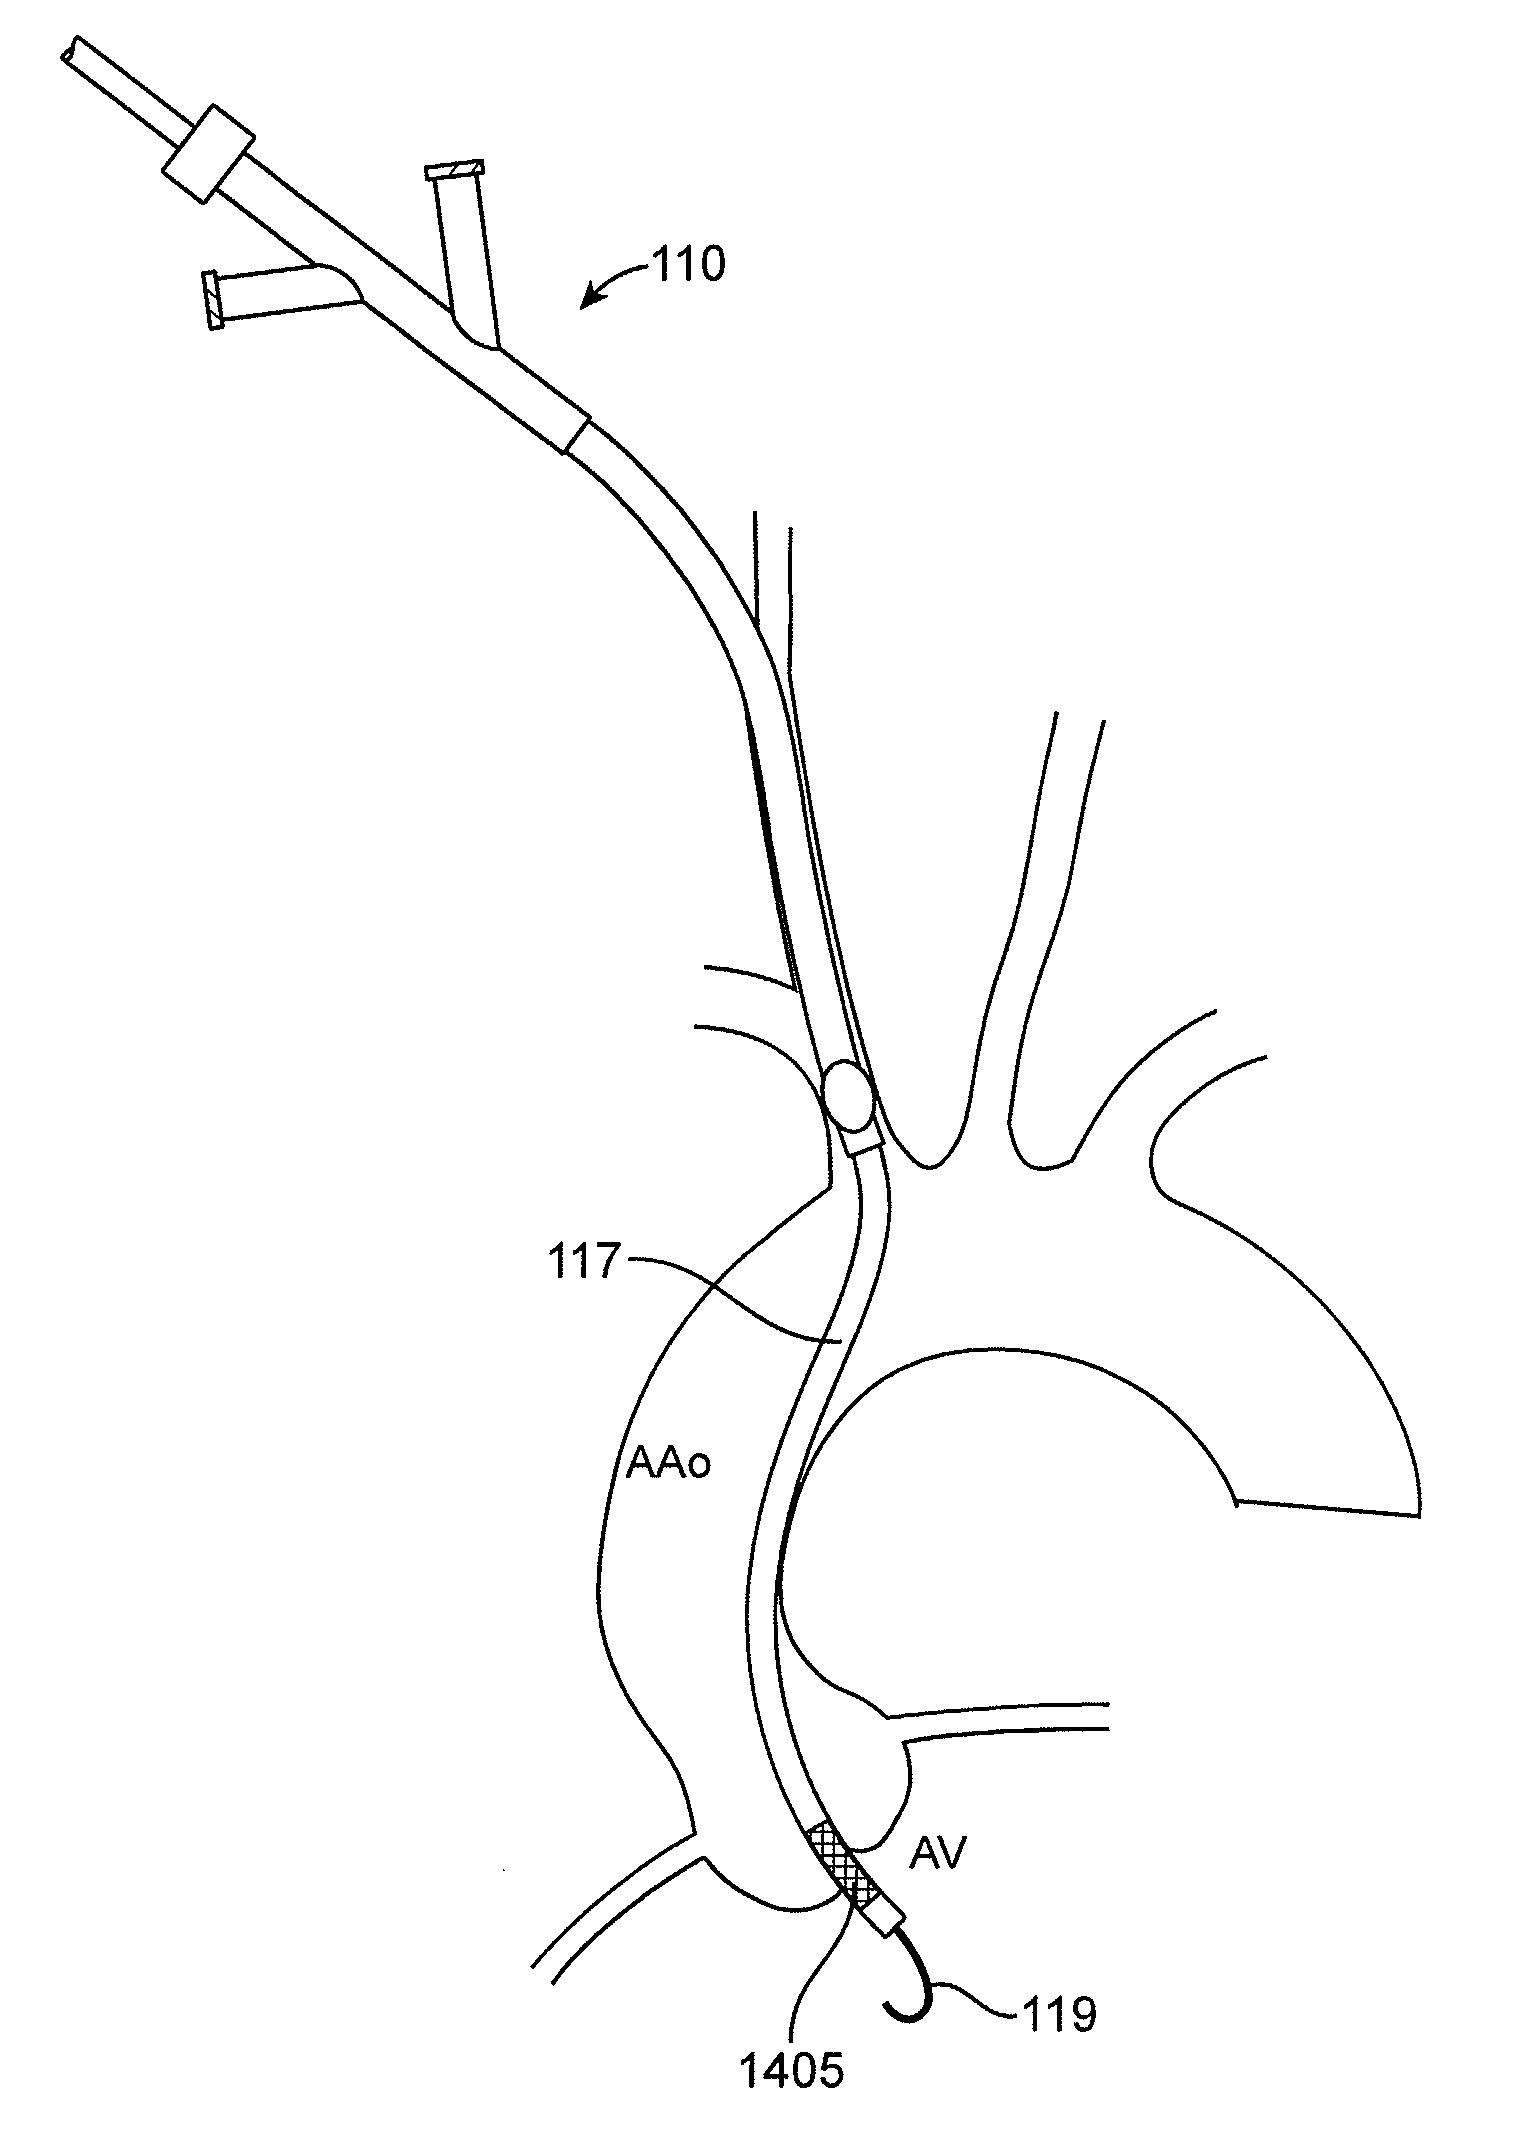 Systems and methods for transcatheter aortic valve treatment